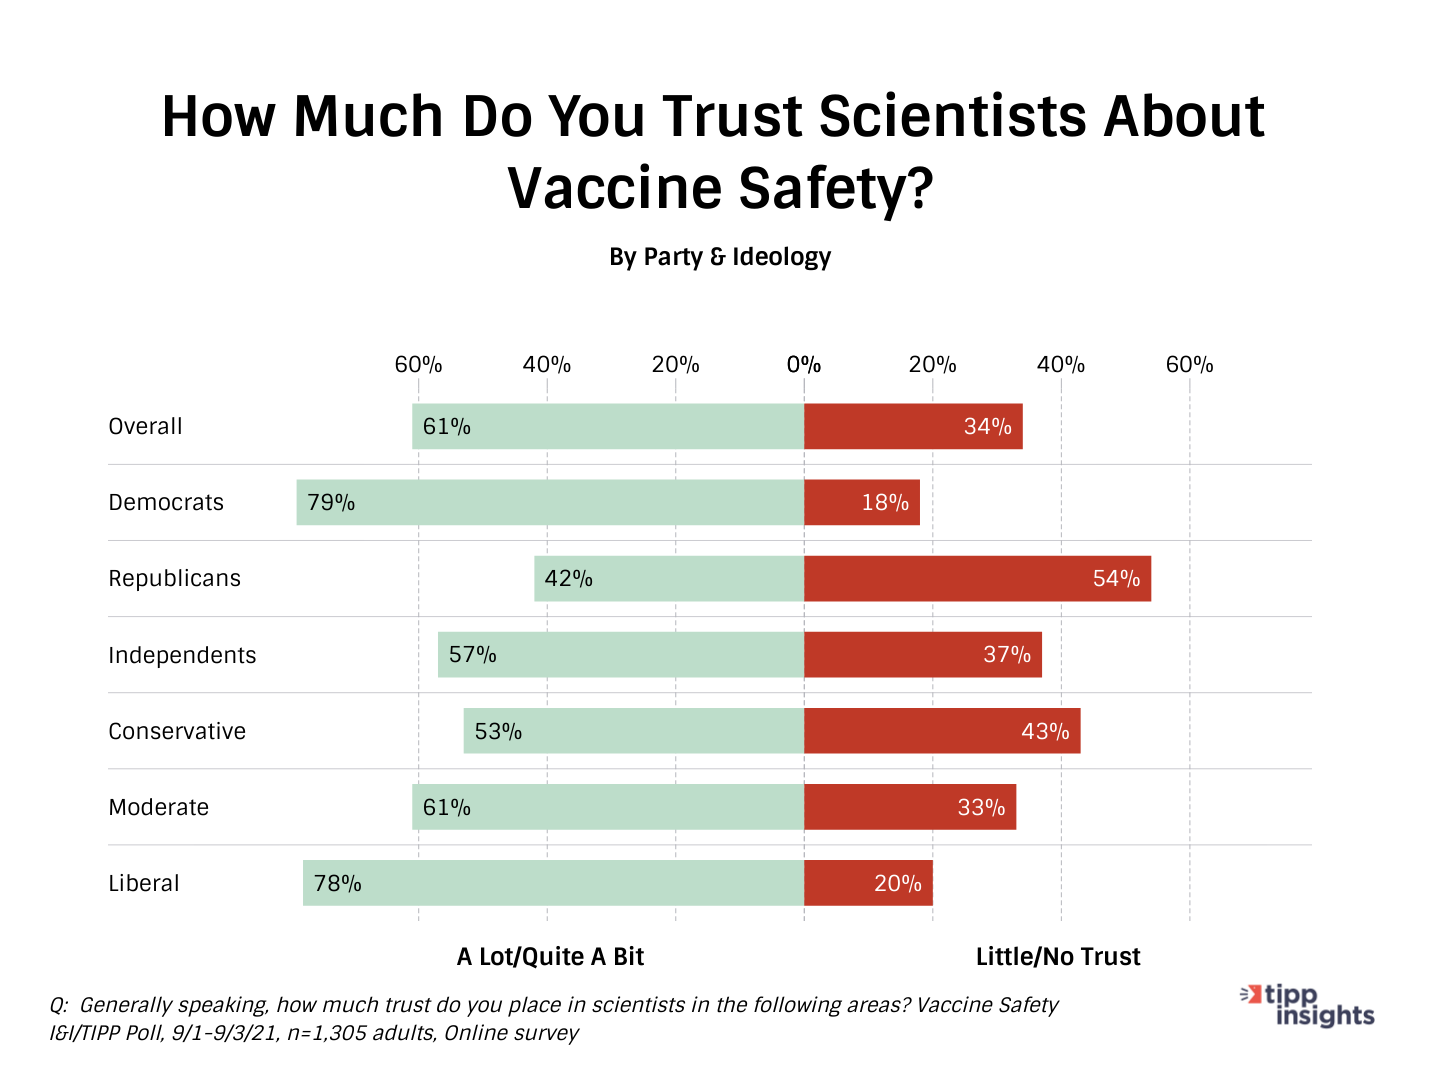 I&I/TIPP Poll asking Americans how much trust do they have towards Scientists and vaccine safety